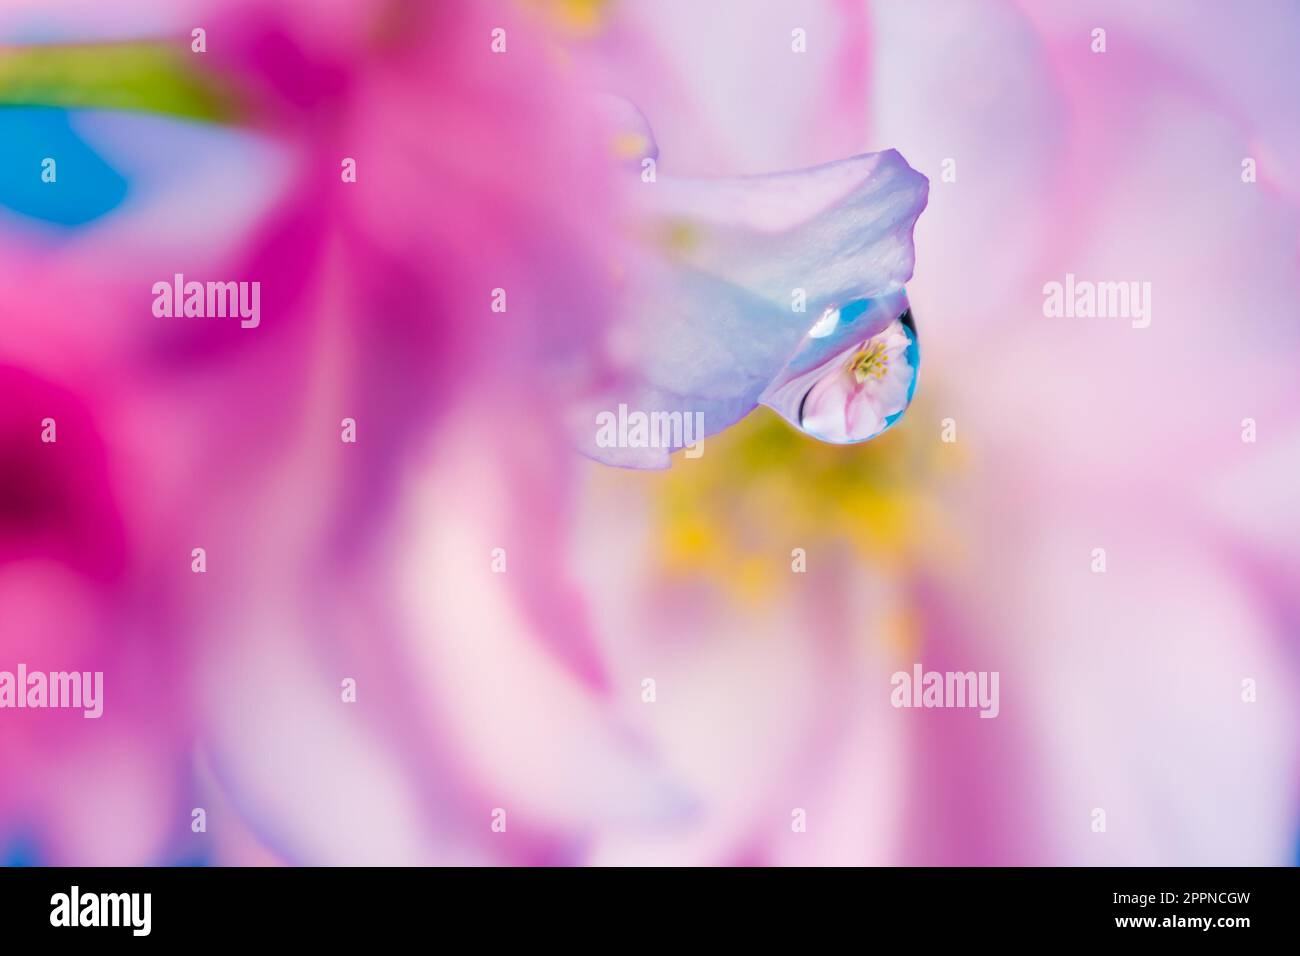 Abstract pink floral macro background with waterdrop reflection Stock Photo